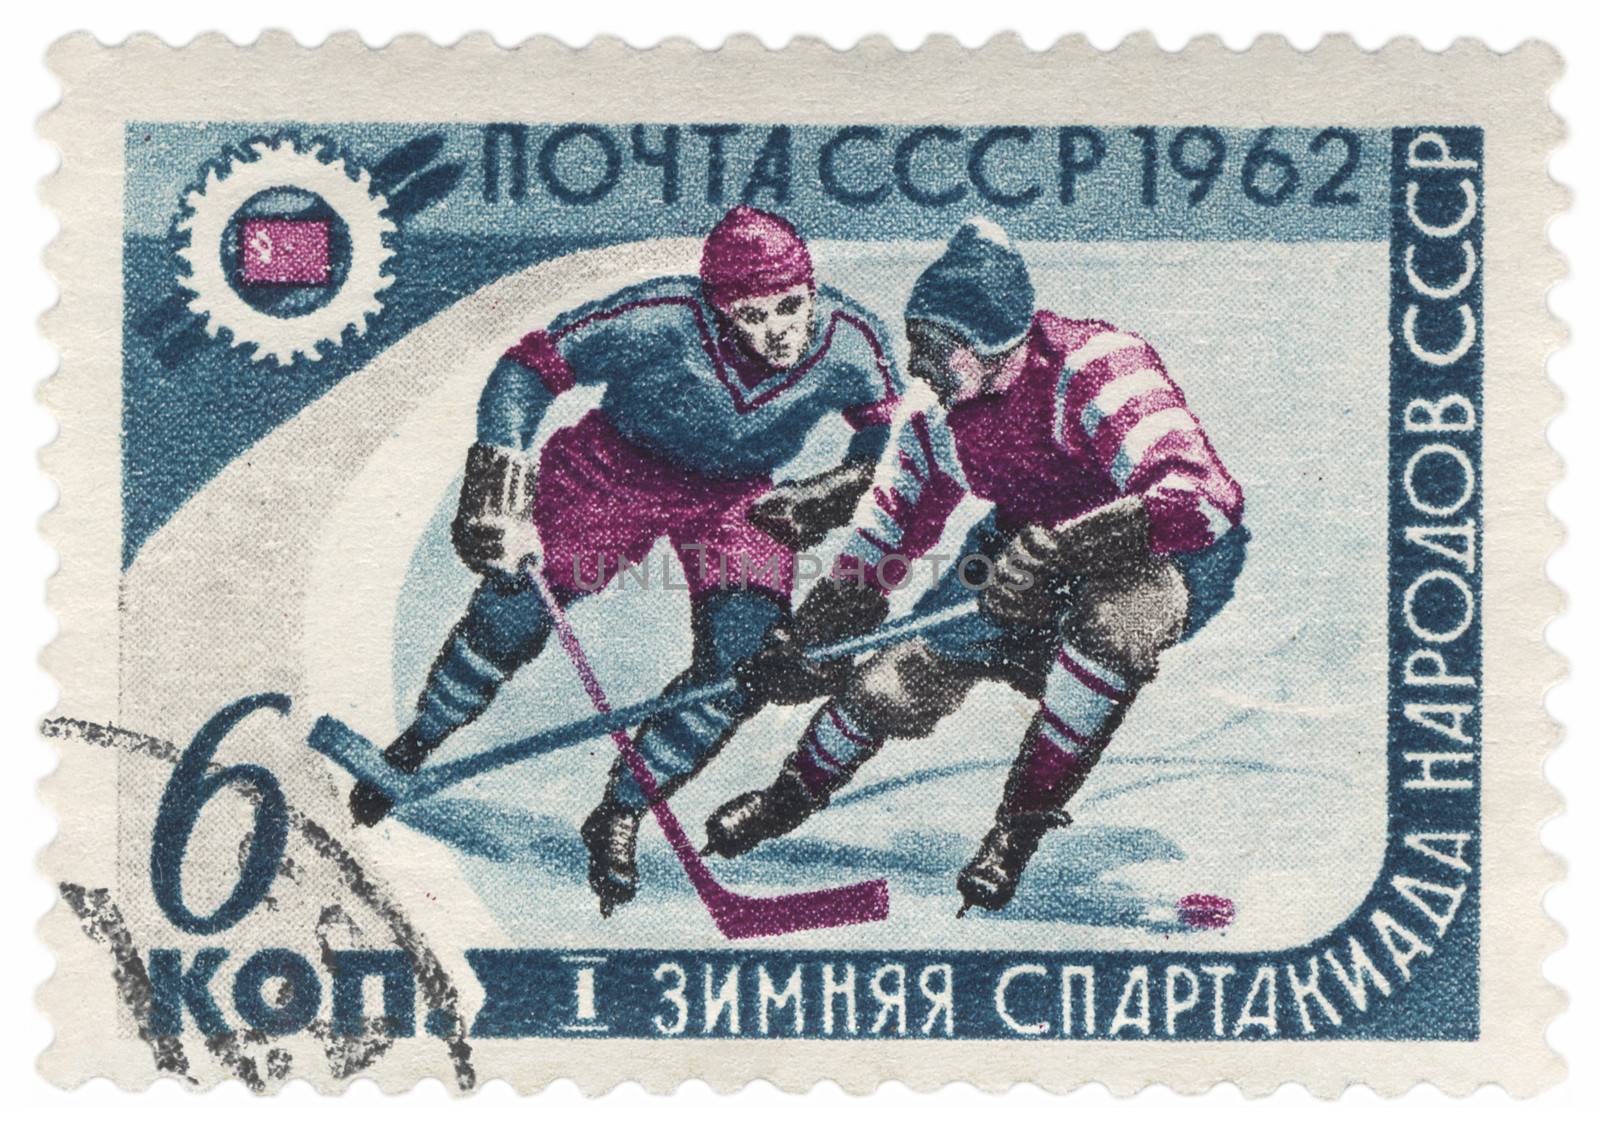 Ice hockey match on post stamp by wander